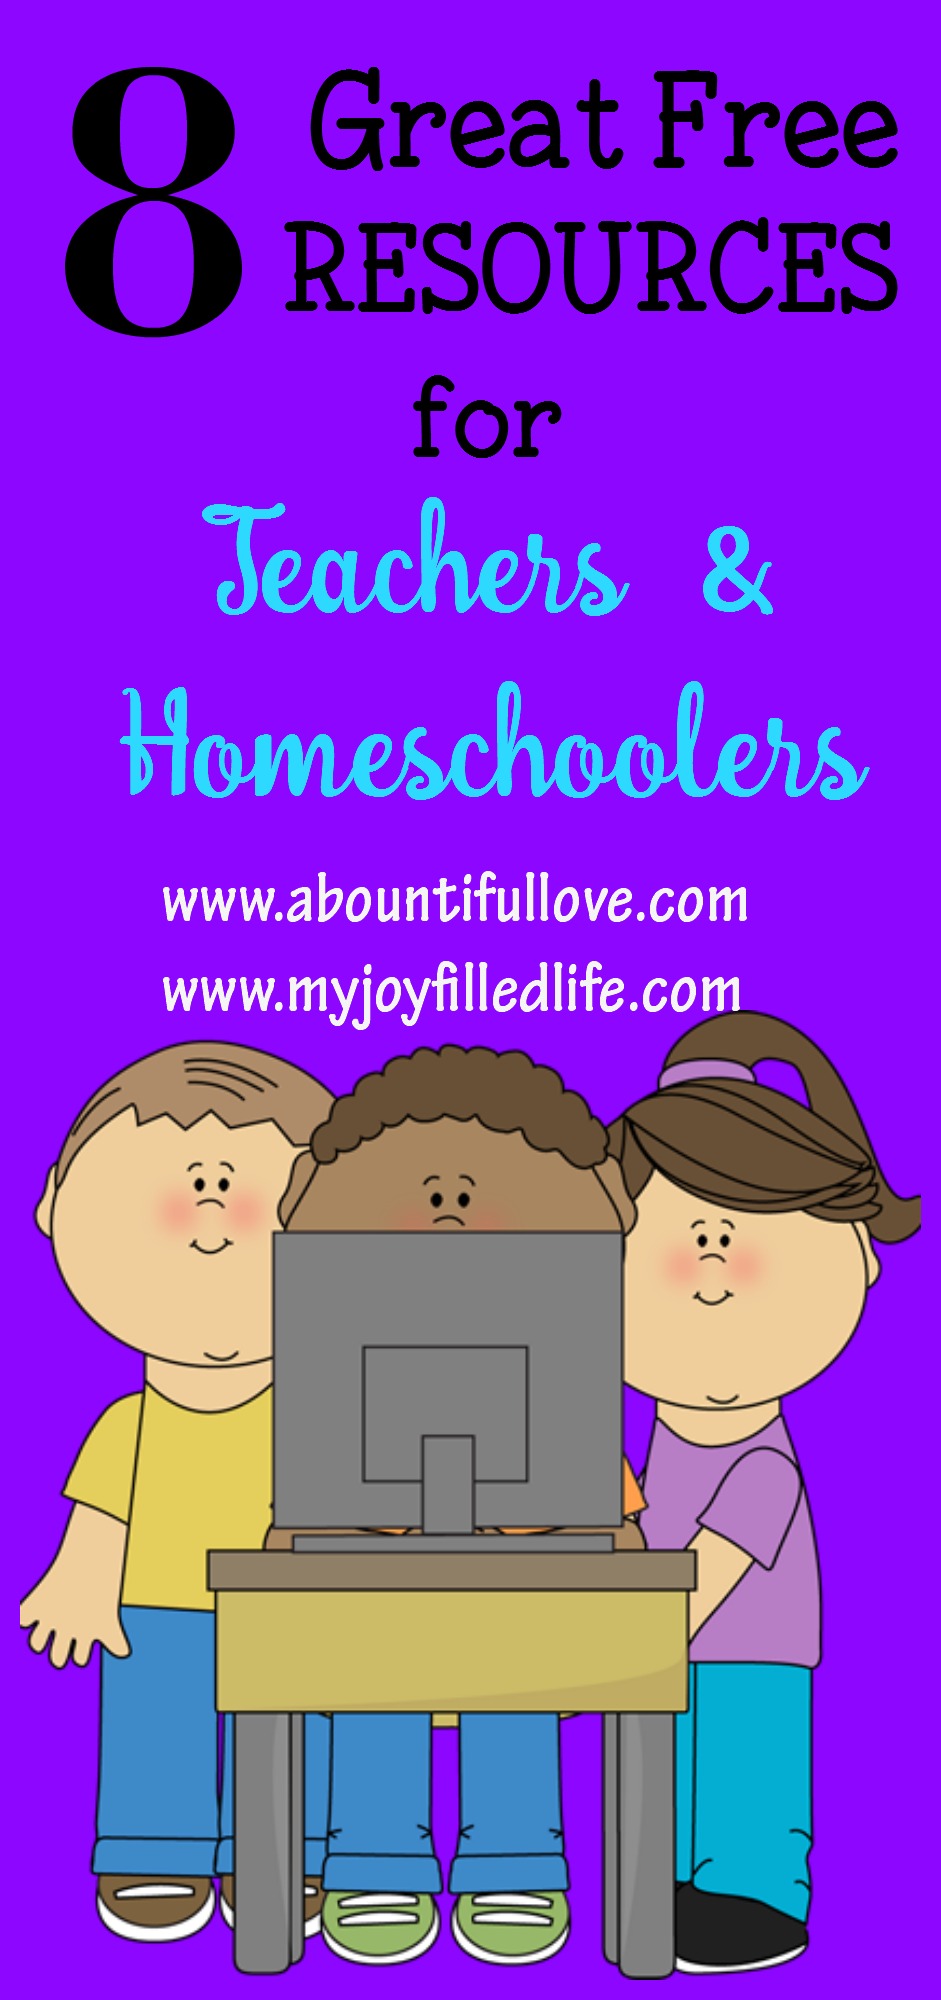 8 Great Free Resources for Teachers and Homeschoolers